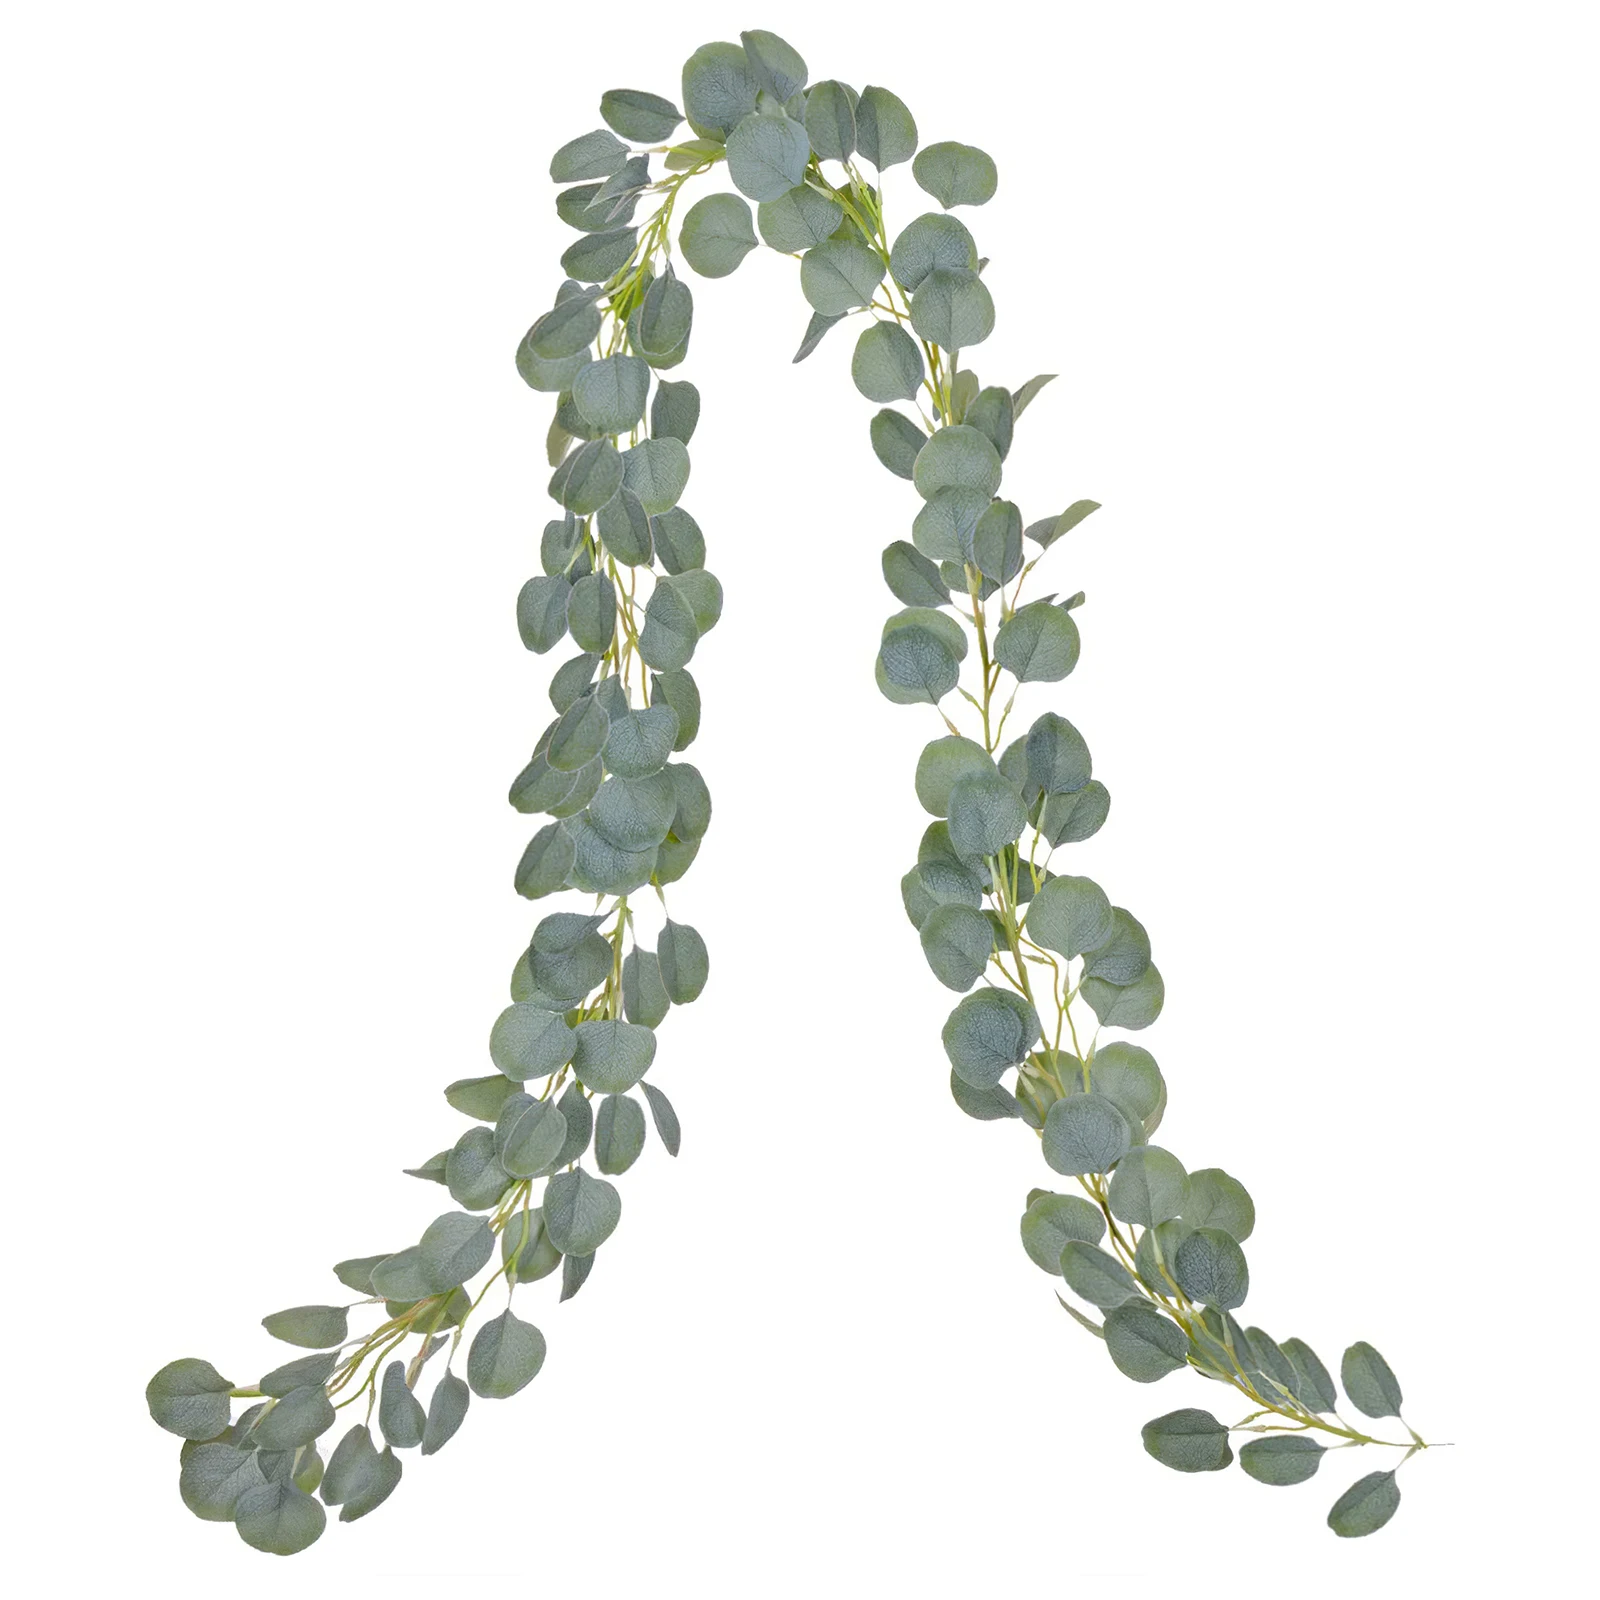 

Artificial Garland Faux Leaves Vines Wreath Hanging Vines Plant Decorations For Room Table Yard Wedding, Green